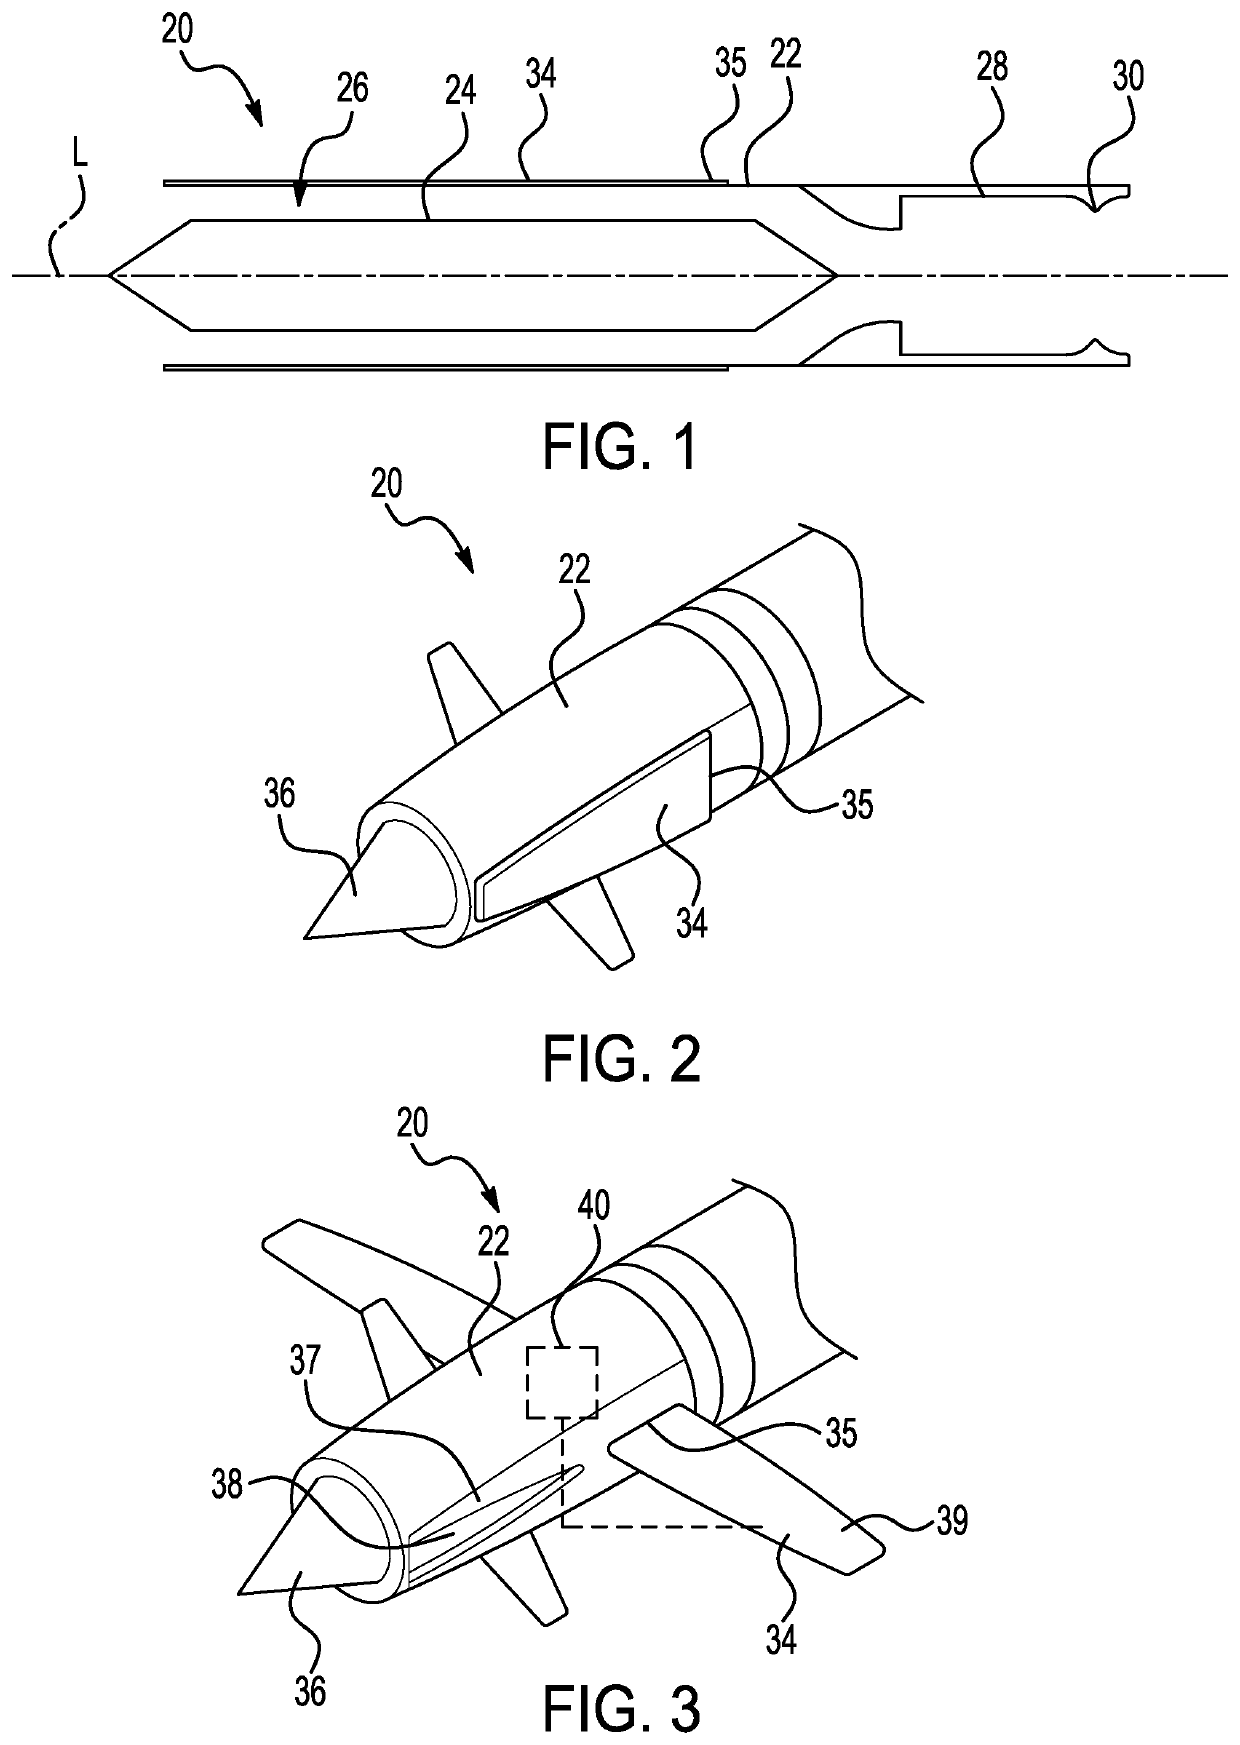 Articulating inlet for airbreathing extended range projectiles and missiles